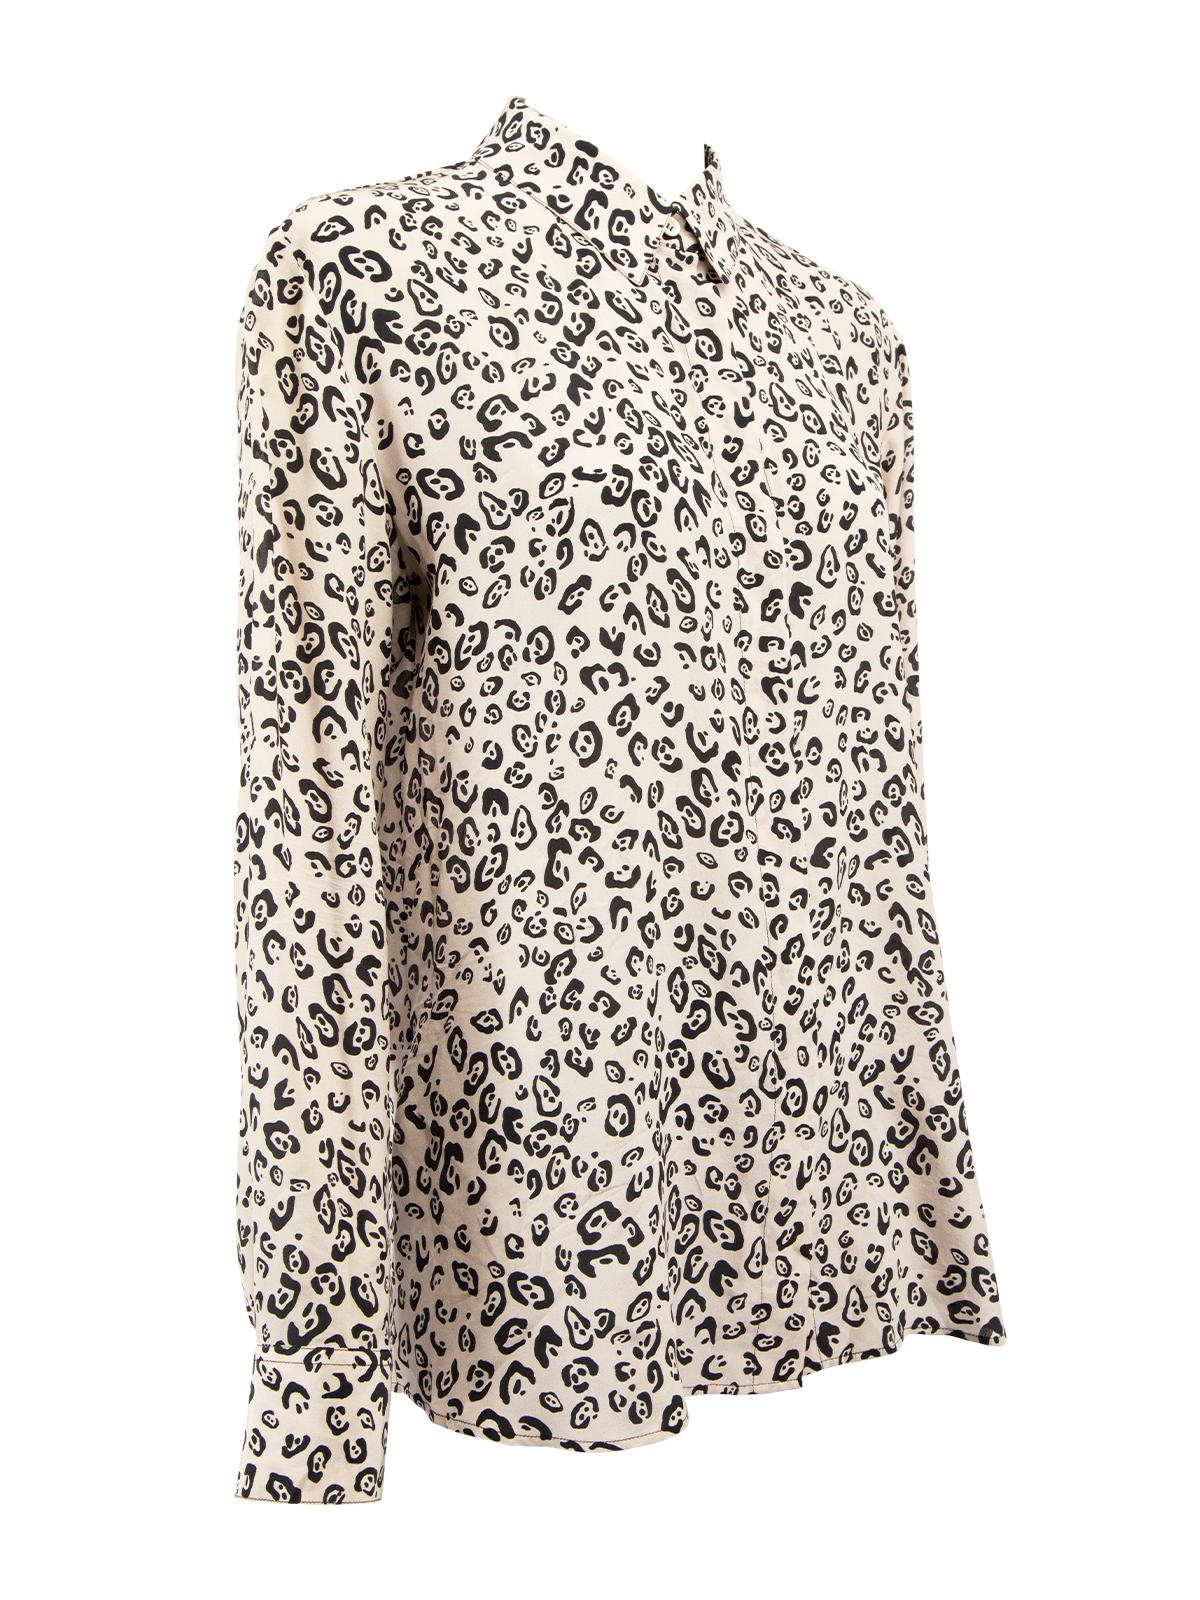 CONDITION is Very good. Hardly any visible wear on this used Altuzarra designer resale item.   Details  Leopard print   Silk  Loose fit Long sleeves    Button down   Made in ITALY   Composition 100% SILK Care instructions: Professional dry clean